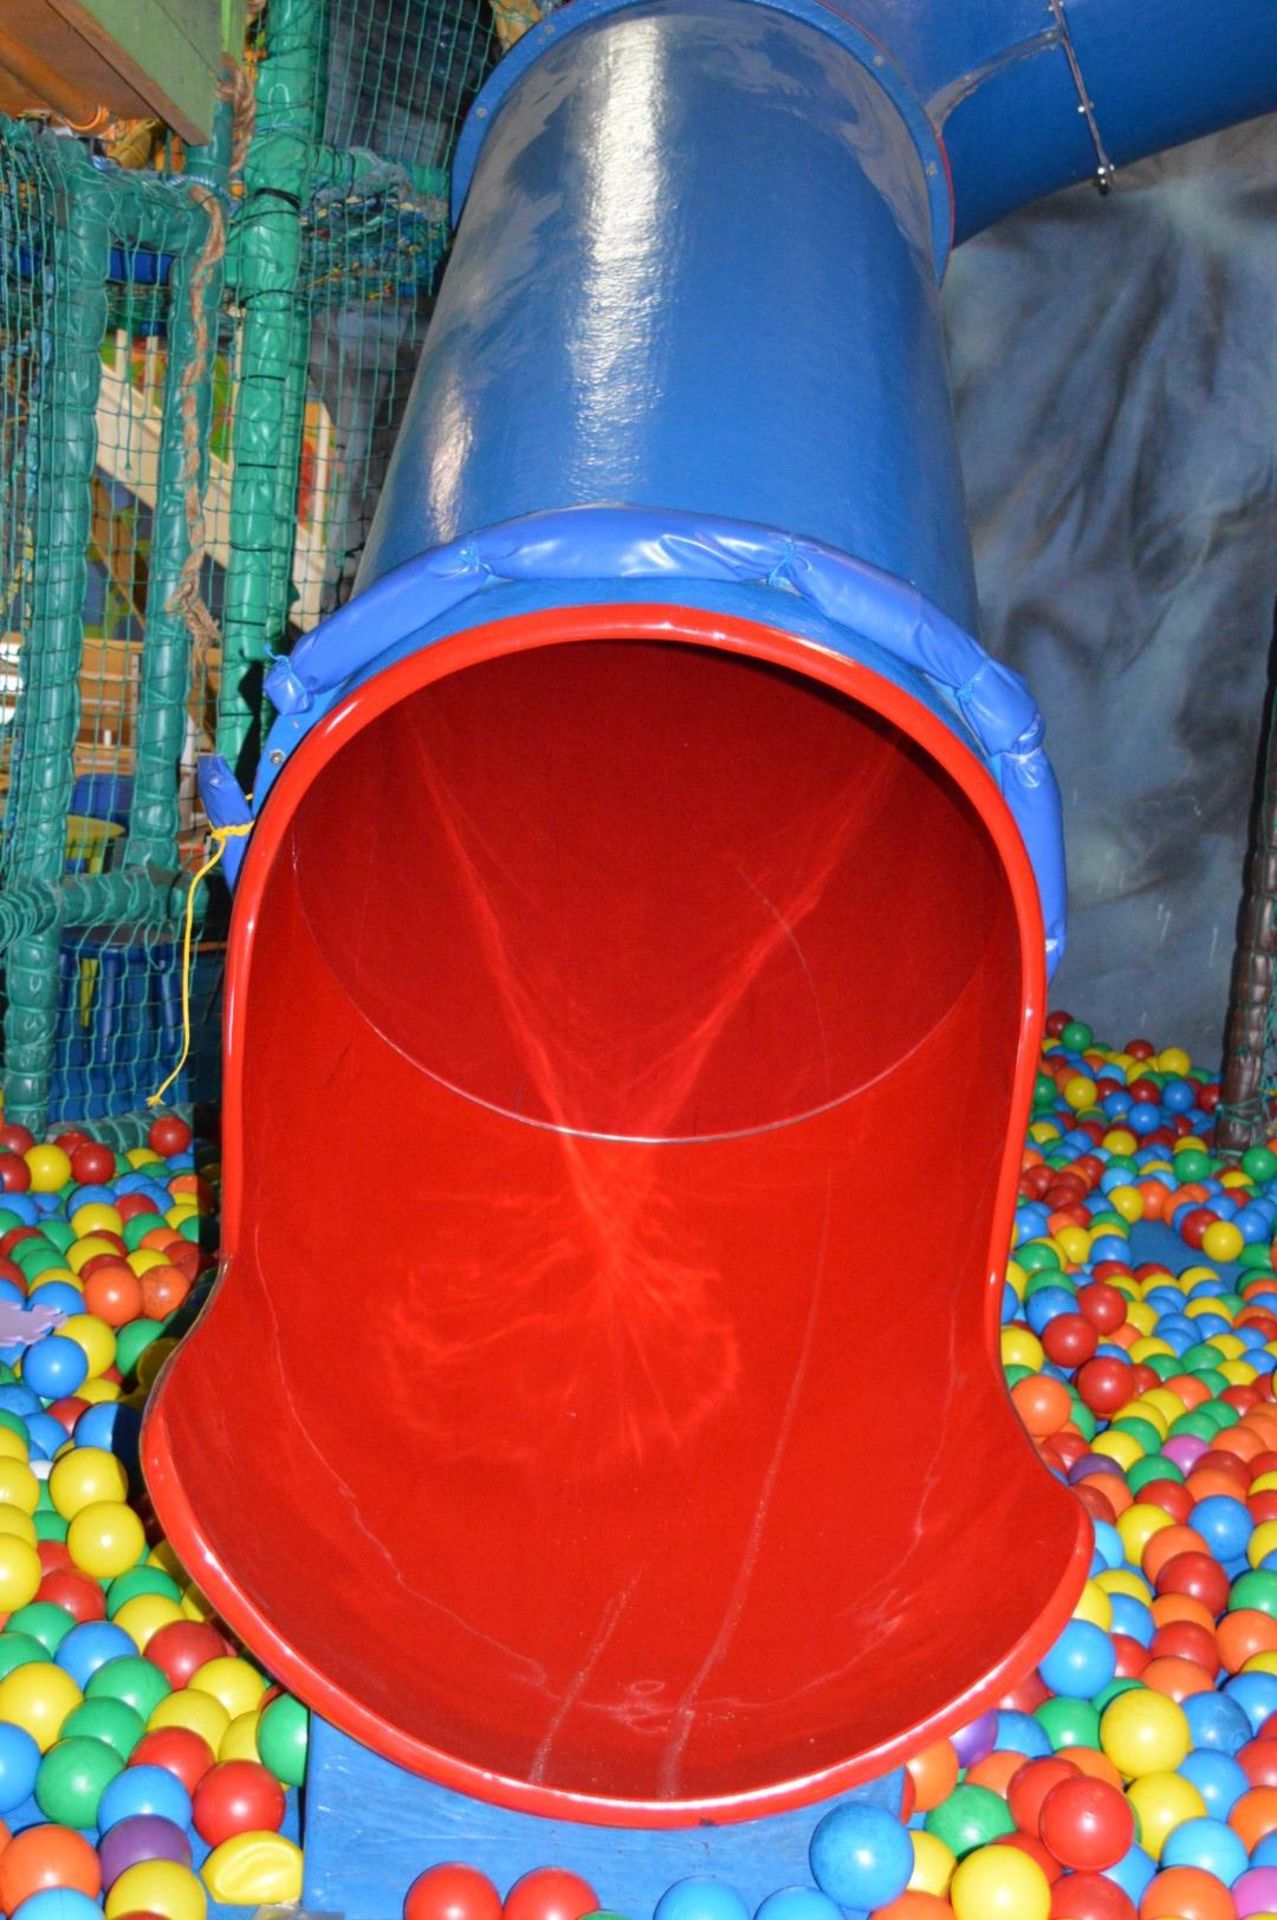 1 x Childrens Playcentre Tunnel Tube Slide in Blue - Very Good Condition - Ref PTP - CL351 - - Image 3 of 3